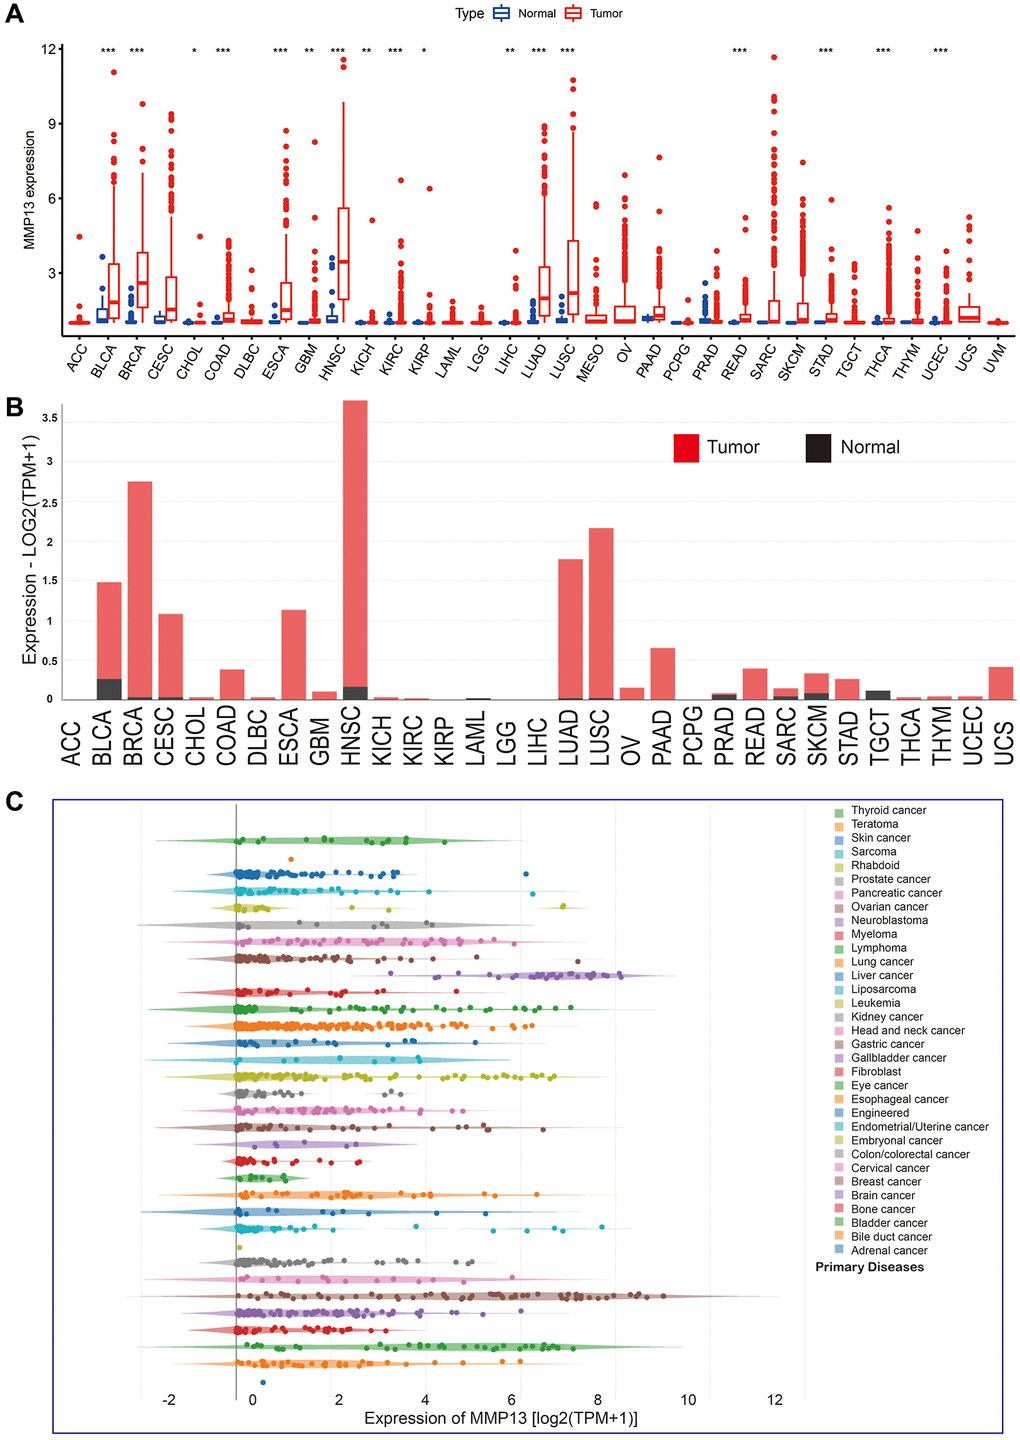 mRNA expression levels of MMP13 in pan-cancer. (A) The levels of MMP13 expression in different types of cancers were analyzed based on the TCGA database. The blue boxplots indicate the normal tissues. The red boxplots indicate the cancer tissues. *P **P ***P B) Analysis of MMP13 mRNA expression in different cancers by the GEPIA2 web tool. (C) MMP13 mRNA expression in 33 tumor cell lines from the CCLE database.